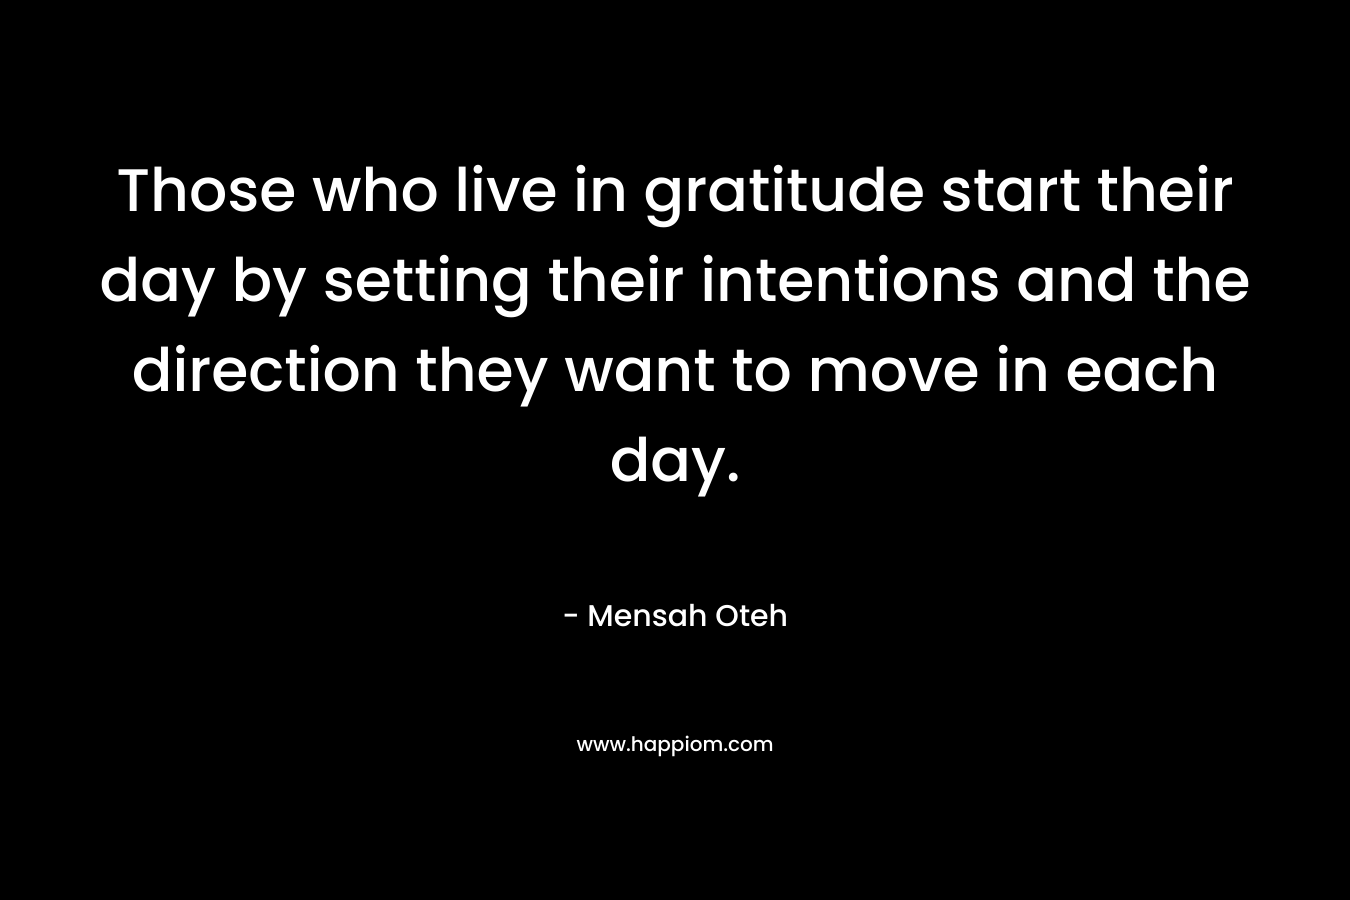 Those who live in gratitude start their day by setting their intentions and the direction they want to move in each day.